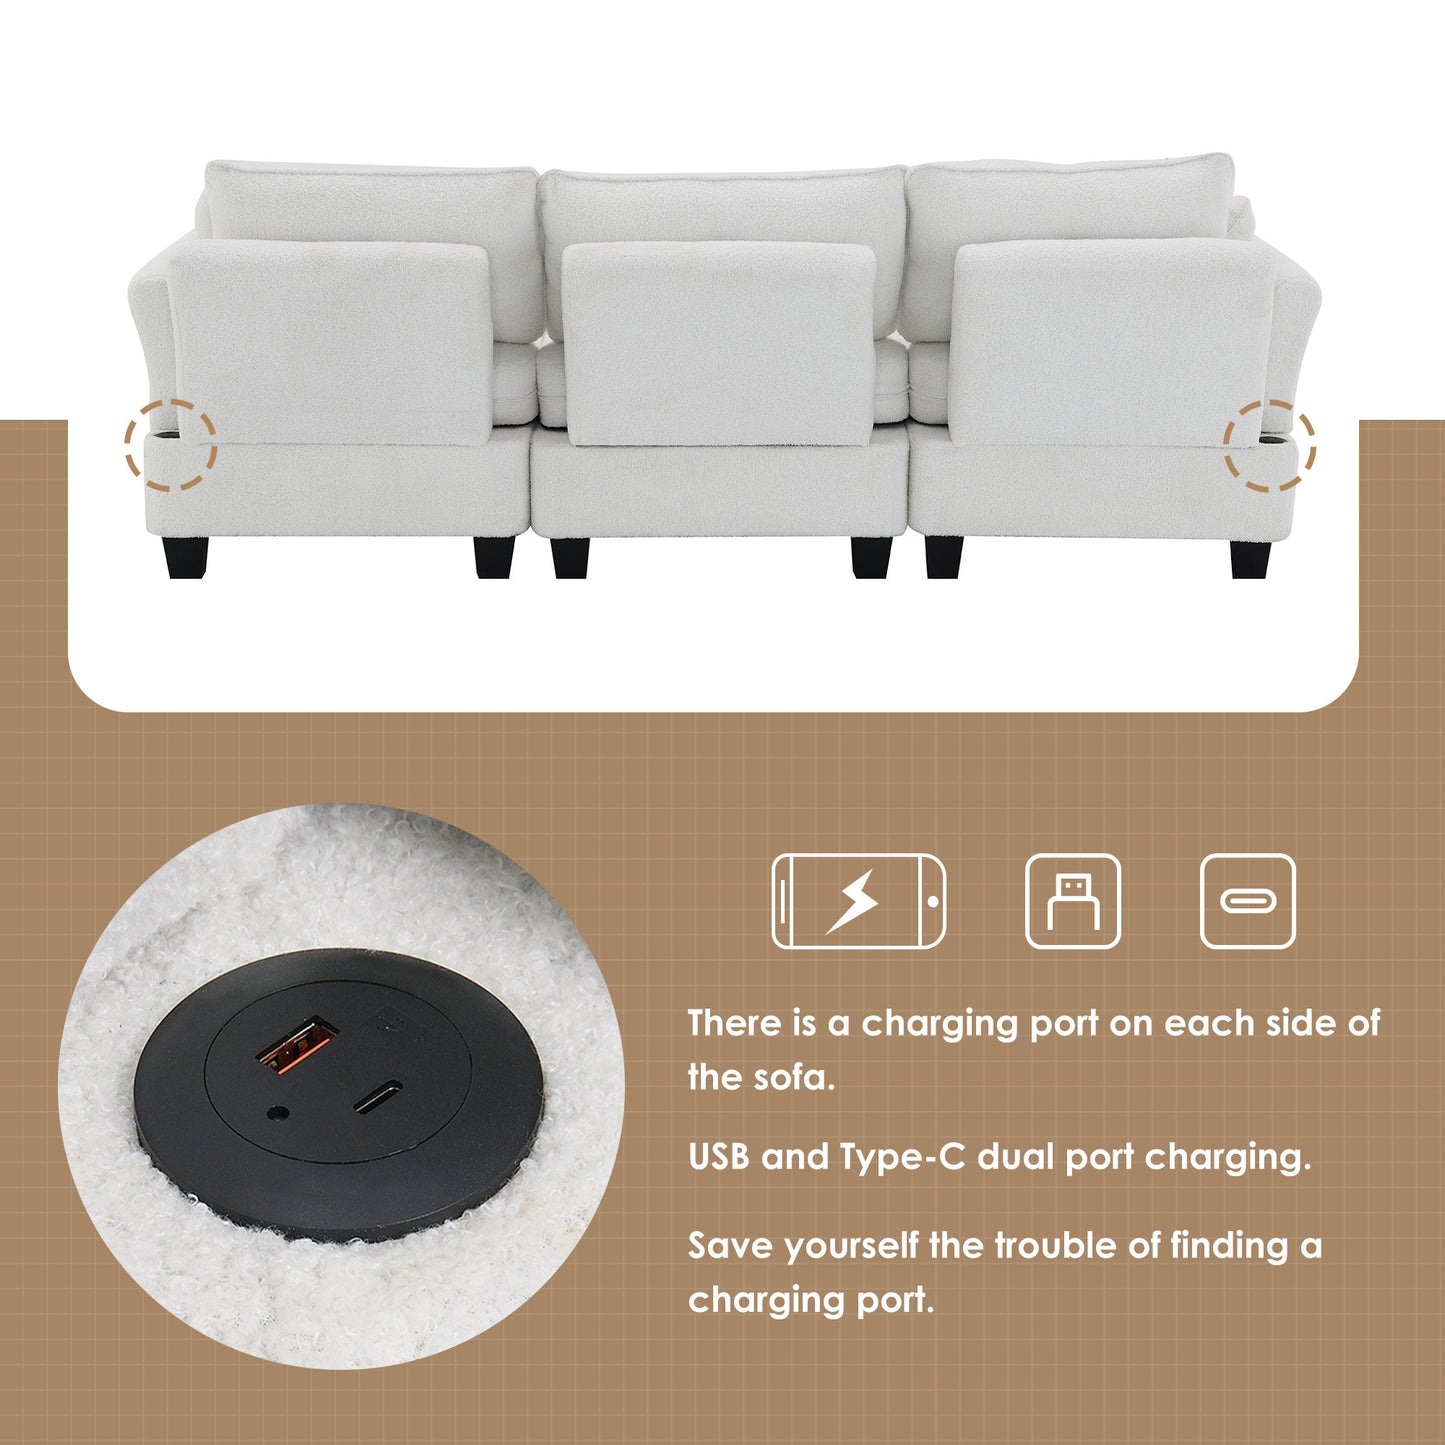 Sectional L-Shape, Chargers, Ottoman, 4 Seats